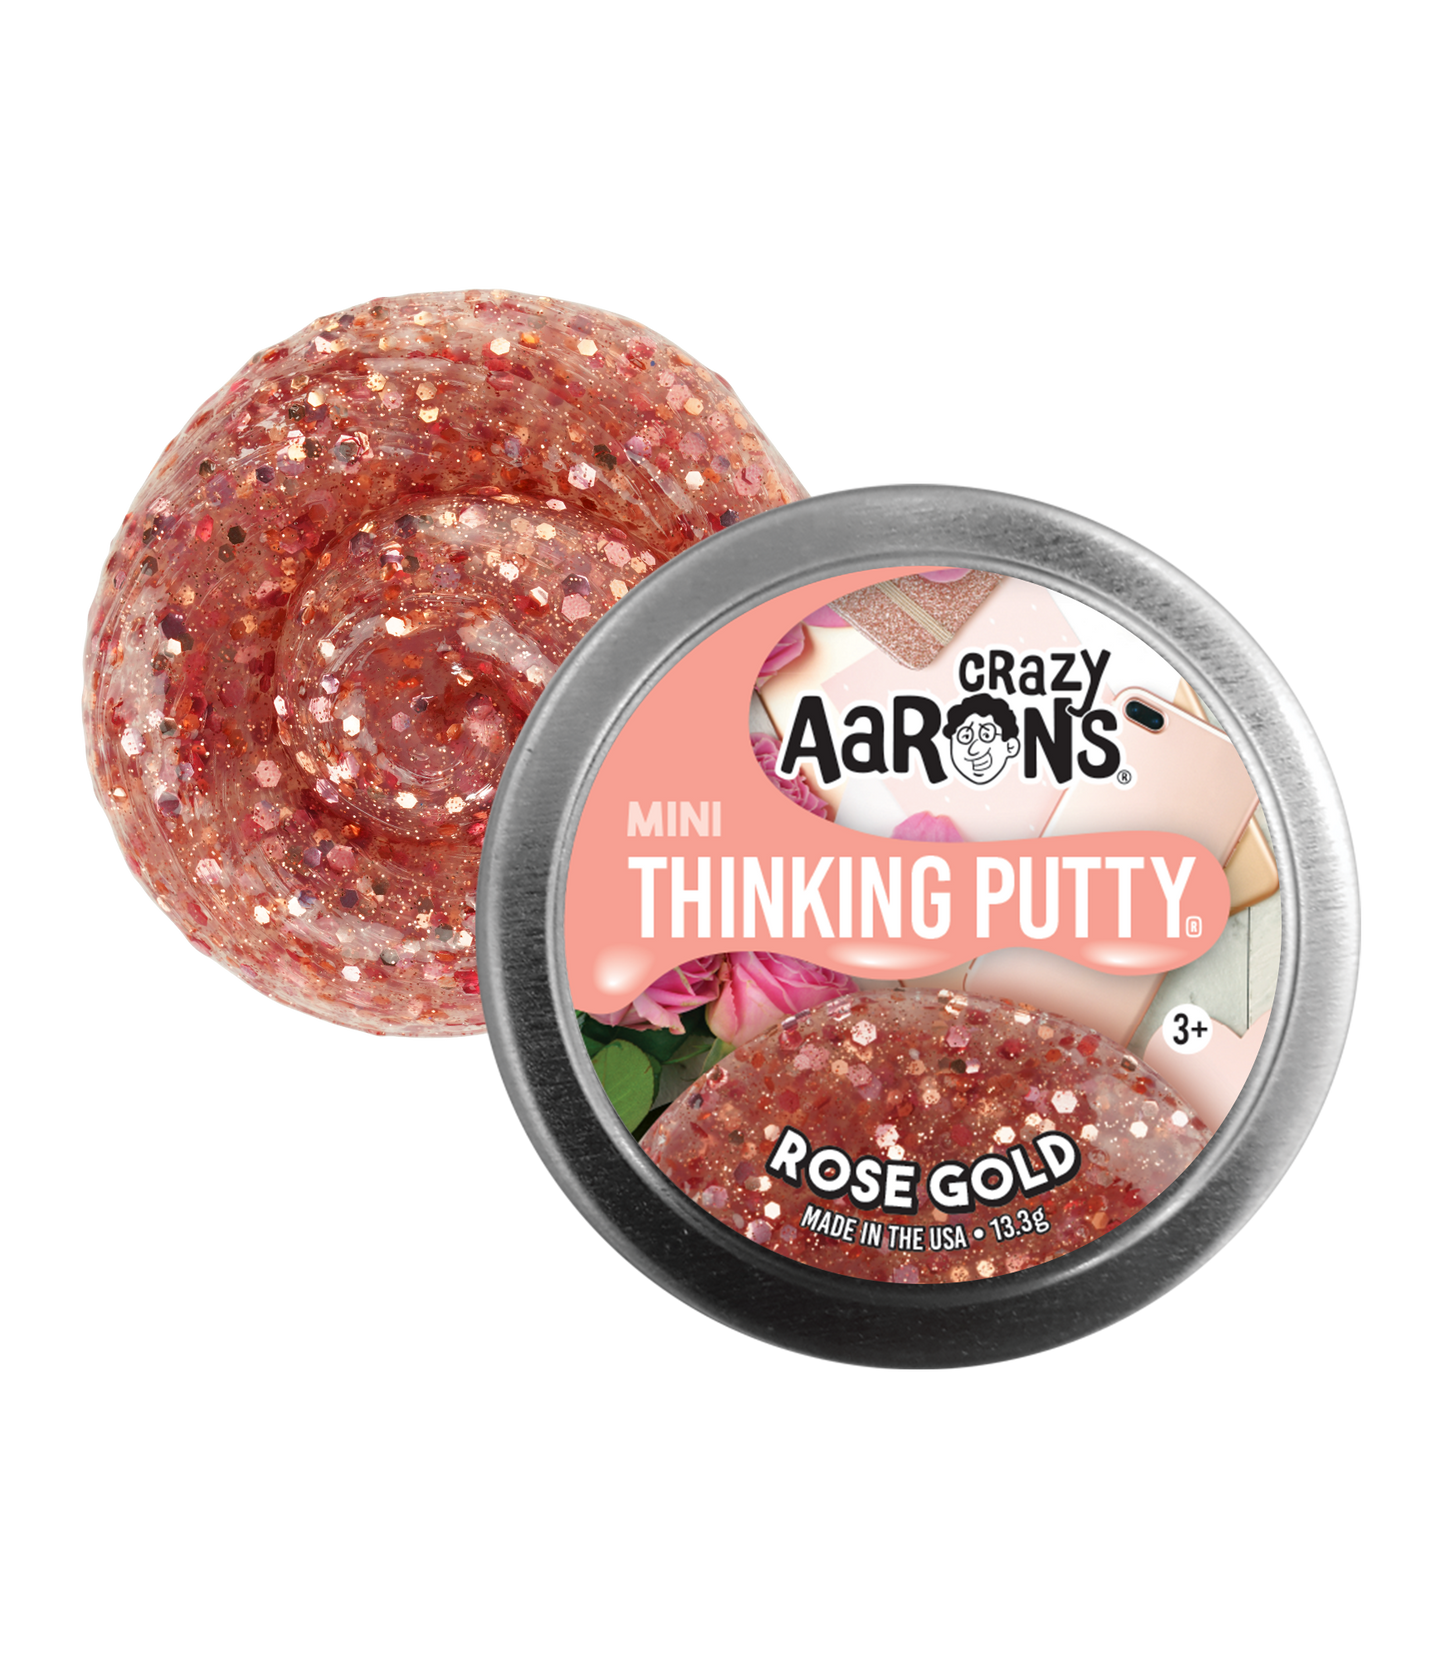 Crazy Aaron's Thinking Putty Mini Assortment - Rose Gold